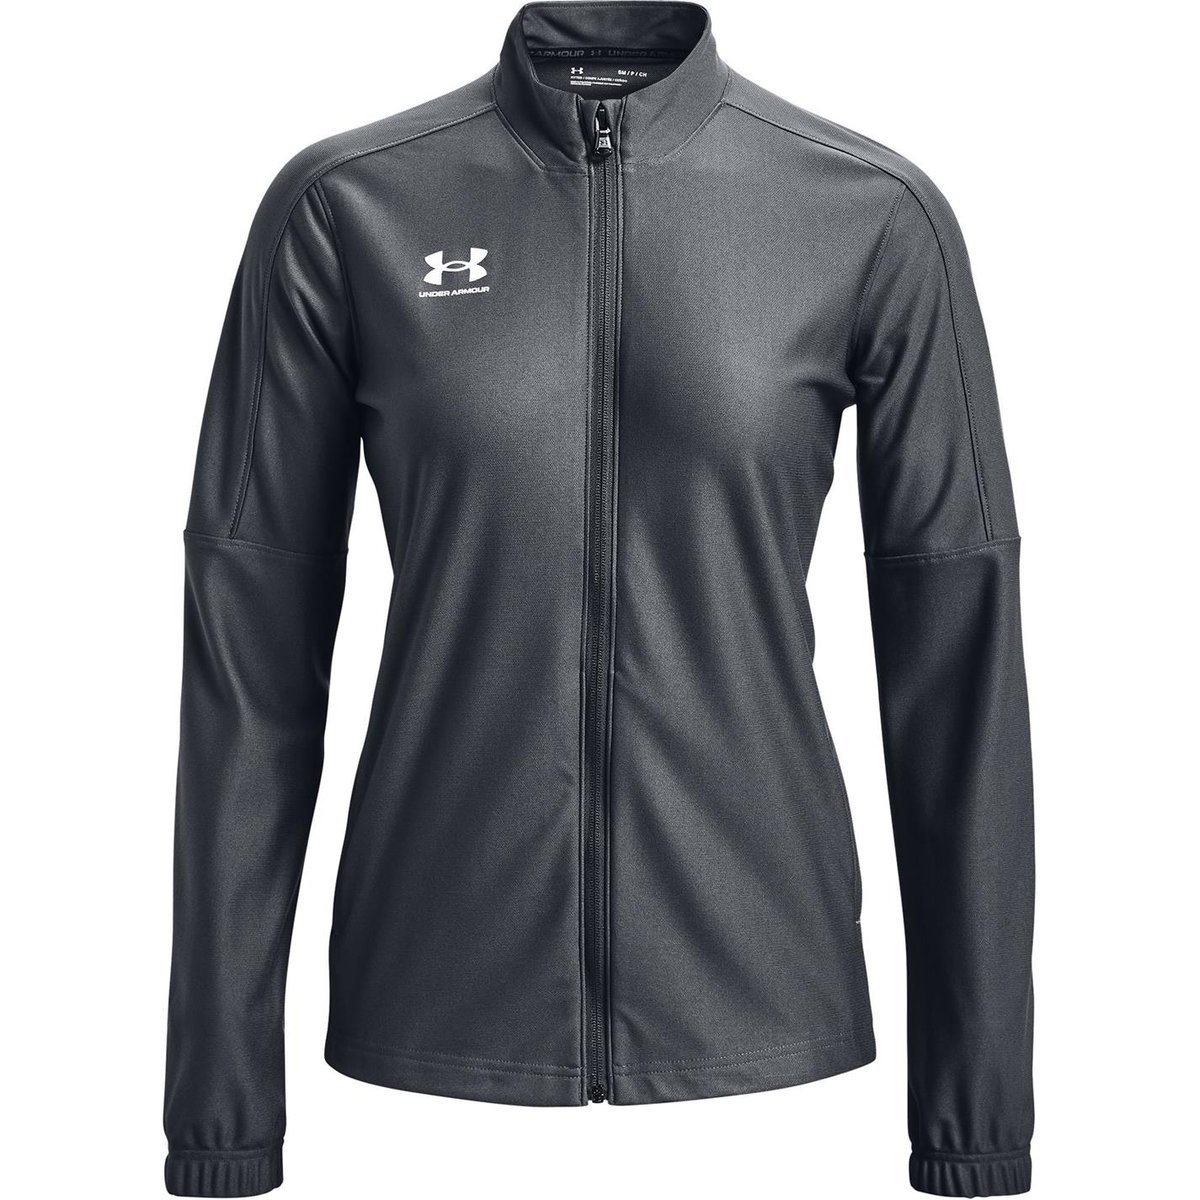 Under Armour Challenger II Jacket in royal and black